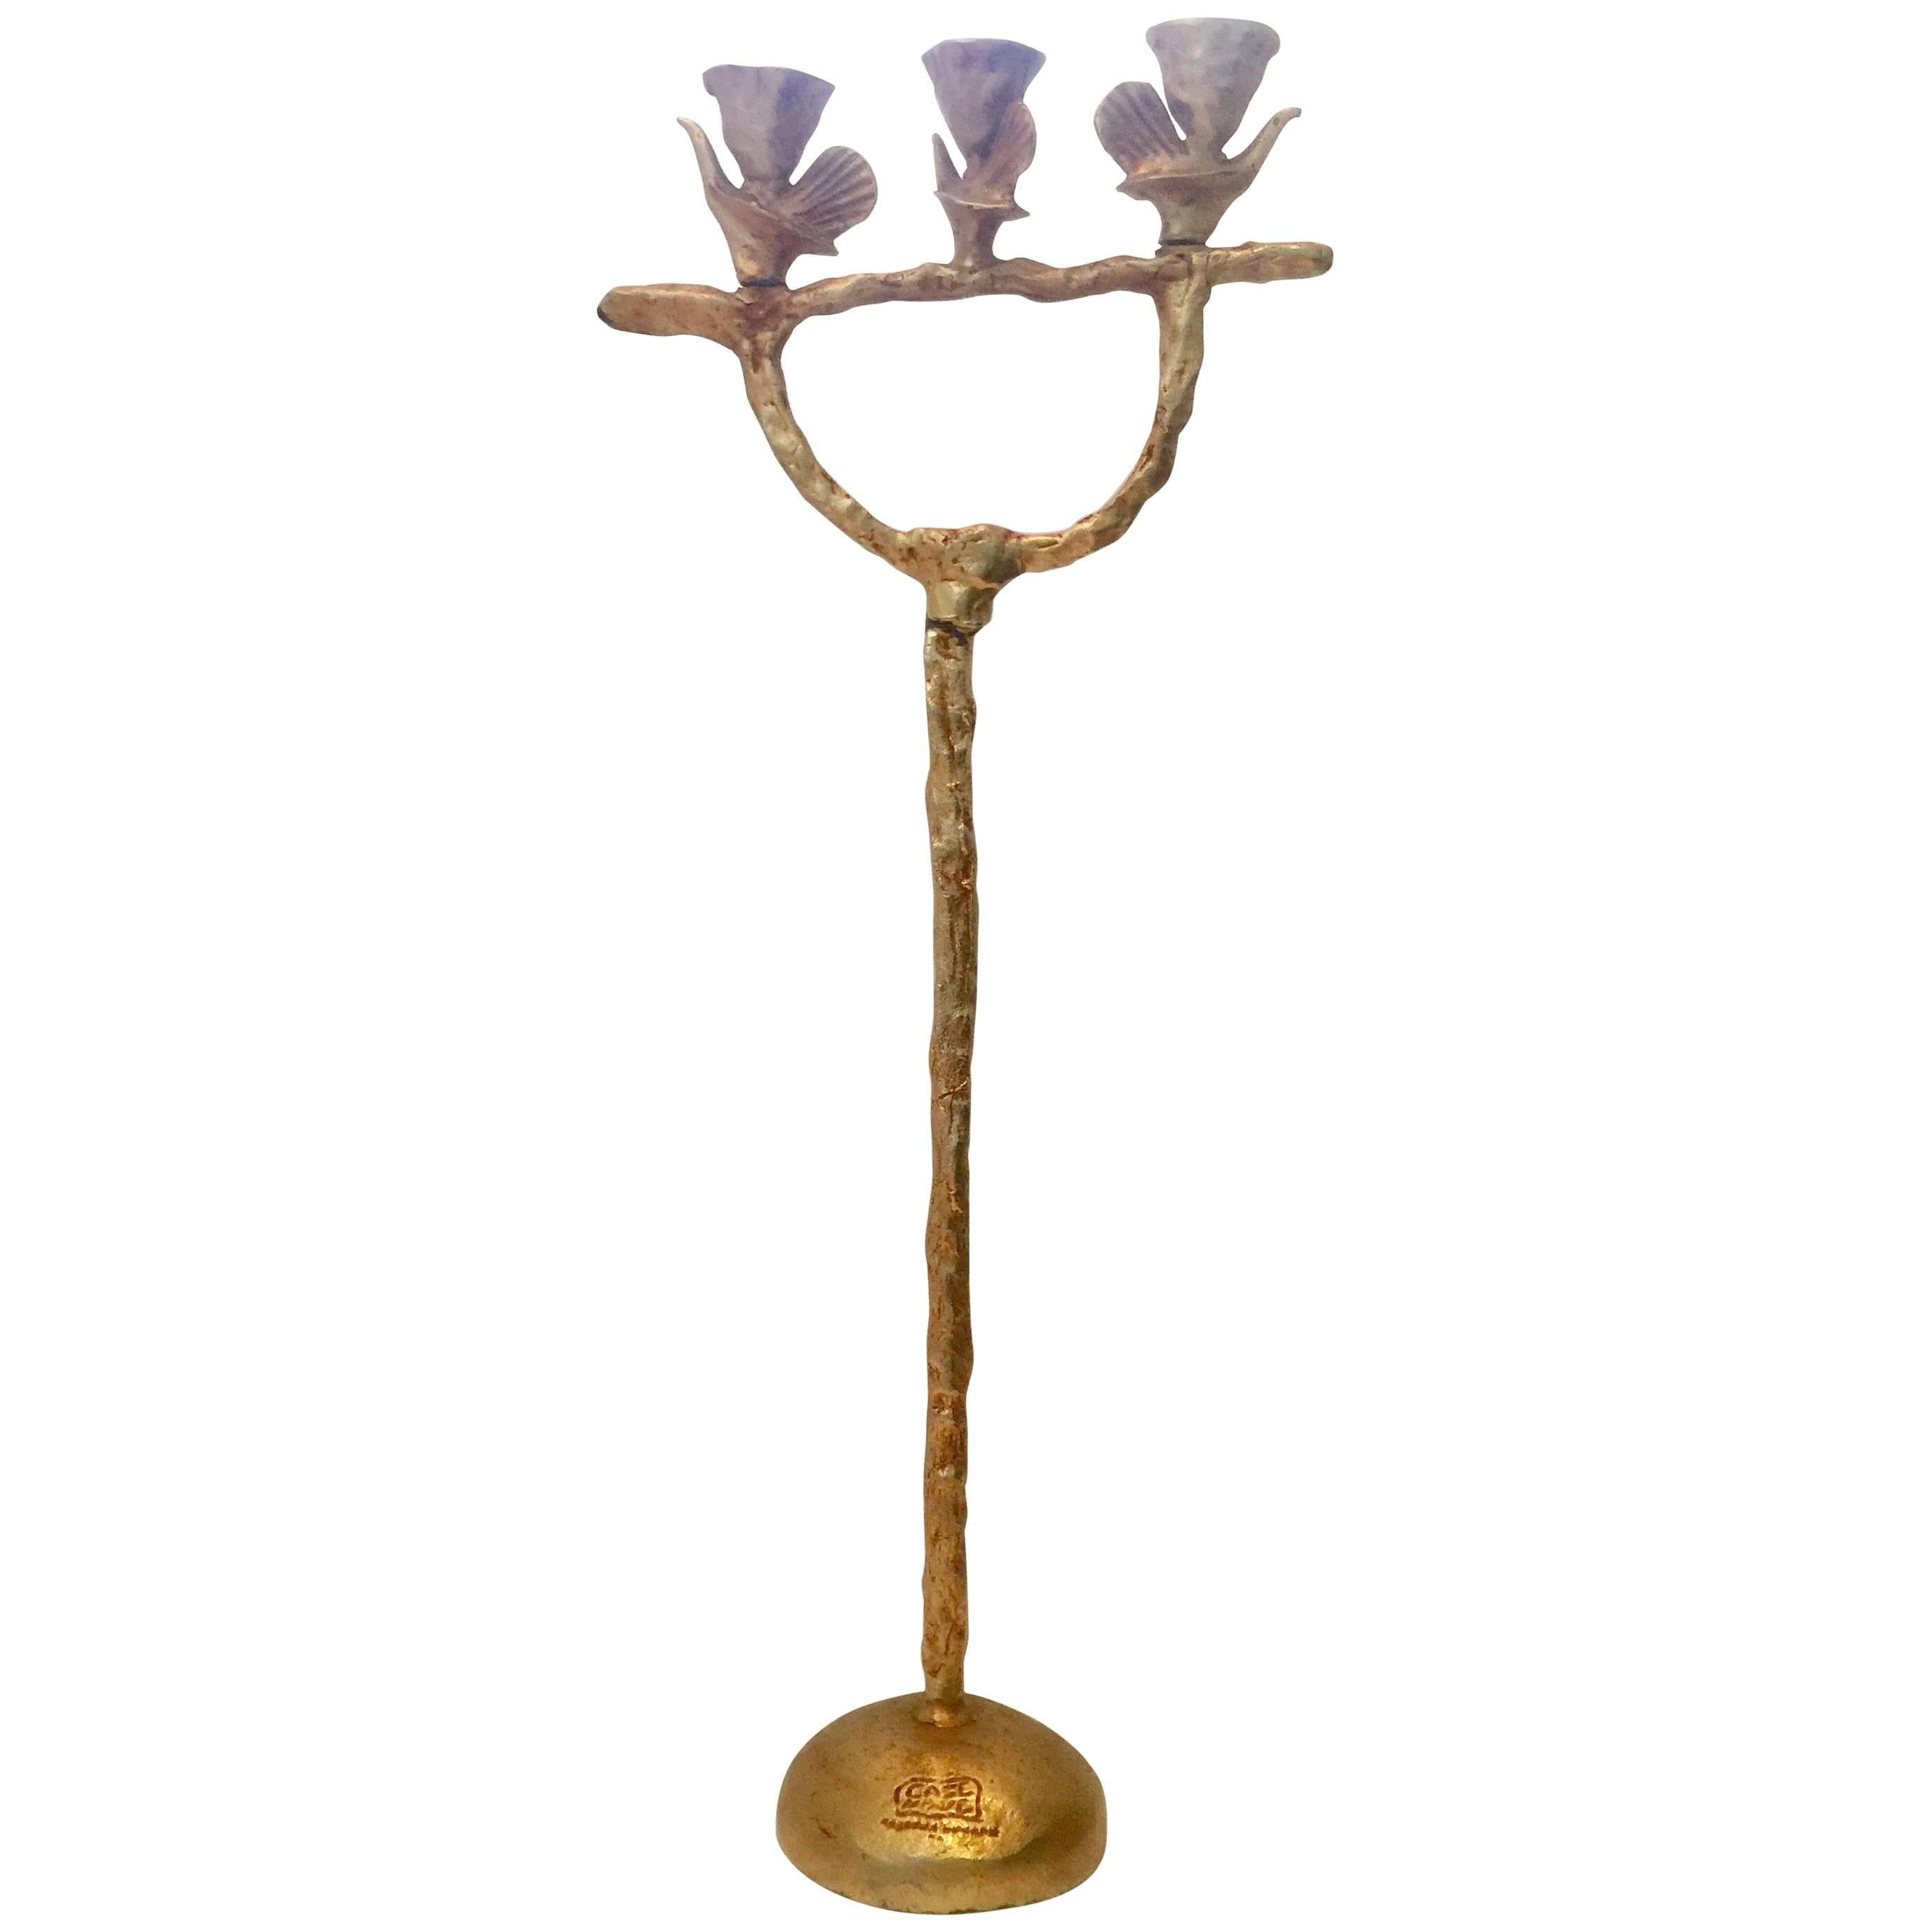 Gilded Bronze Candleholder by Pierre Casenove